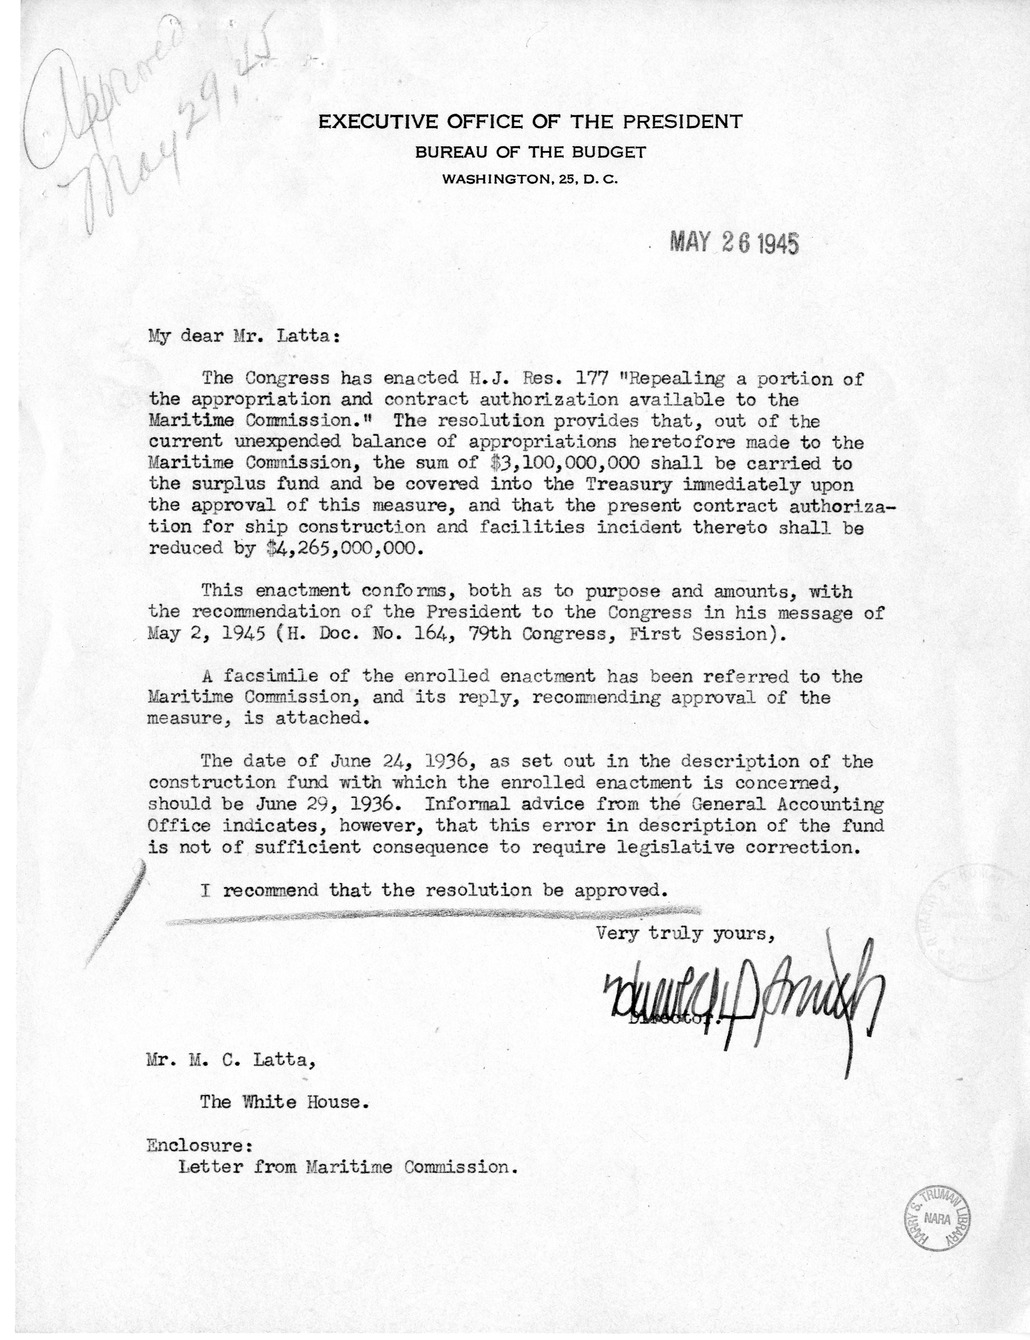 Memorandum from Harold D. Smith to M. C. Latta, H.J. Res. 177, Repealing a Portion of the Appropriation and Contract Authorization Available to the Maritime Commission, with Attachments